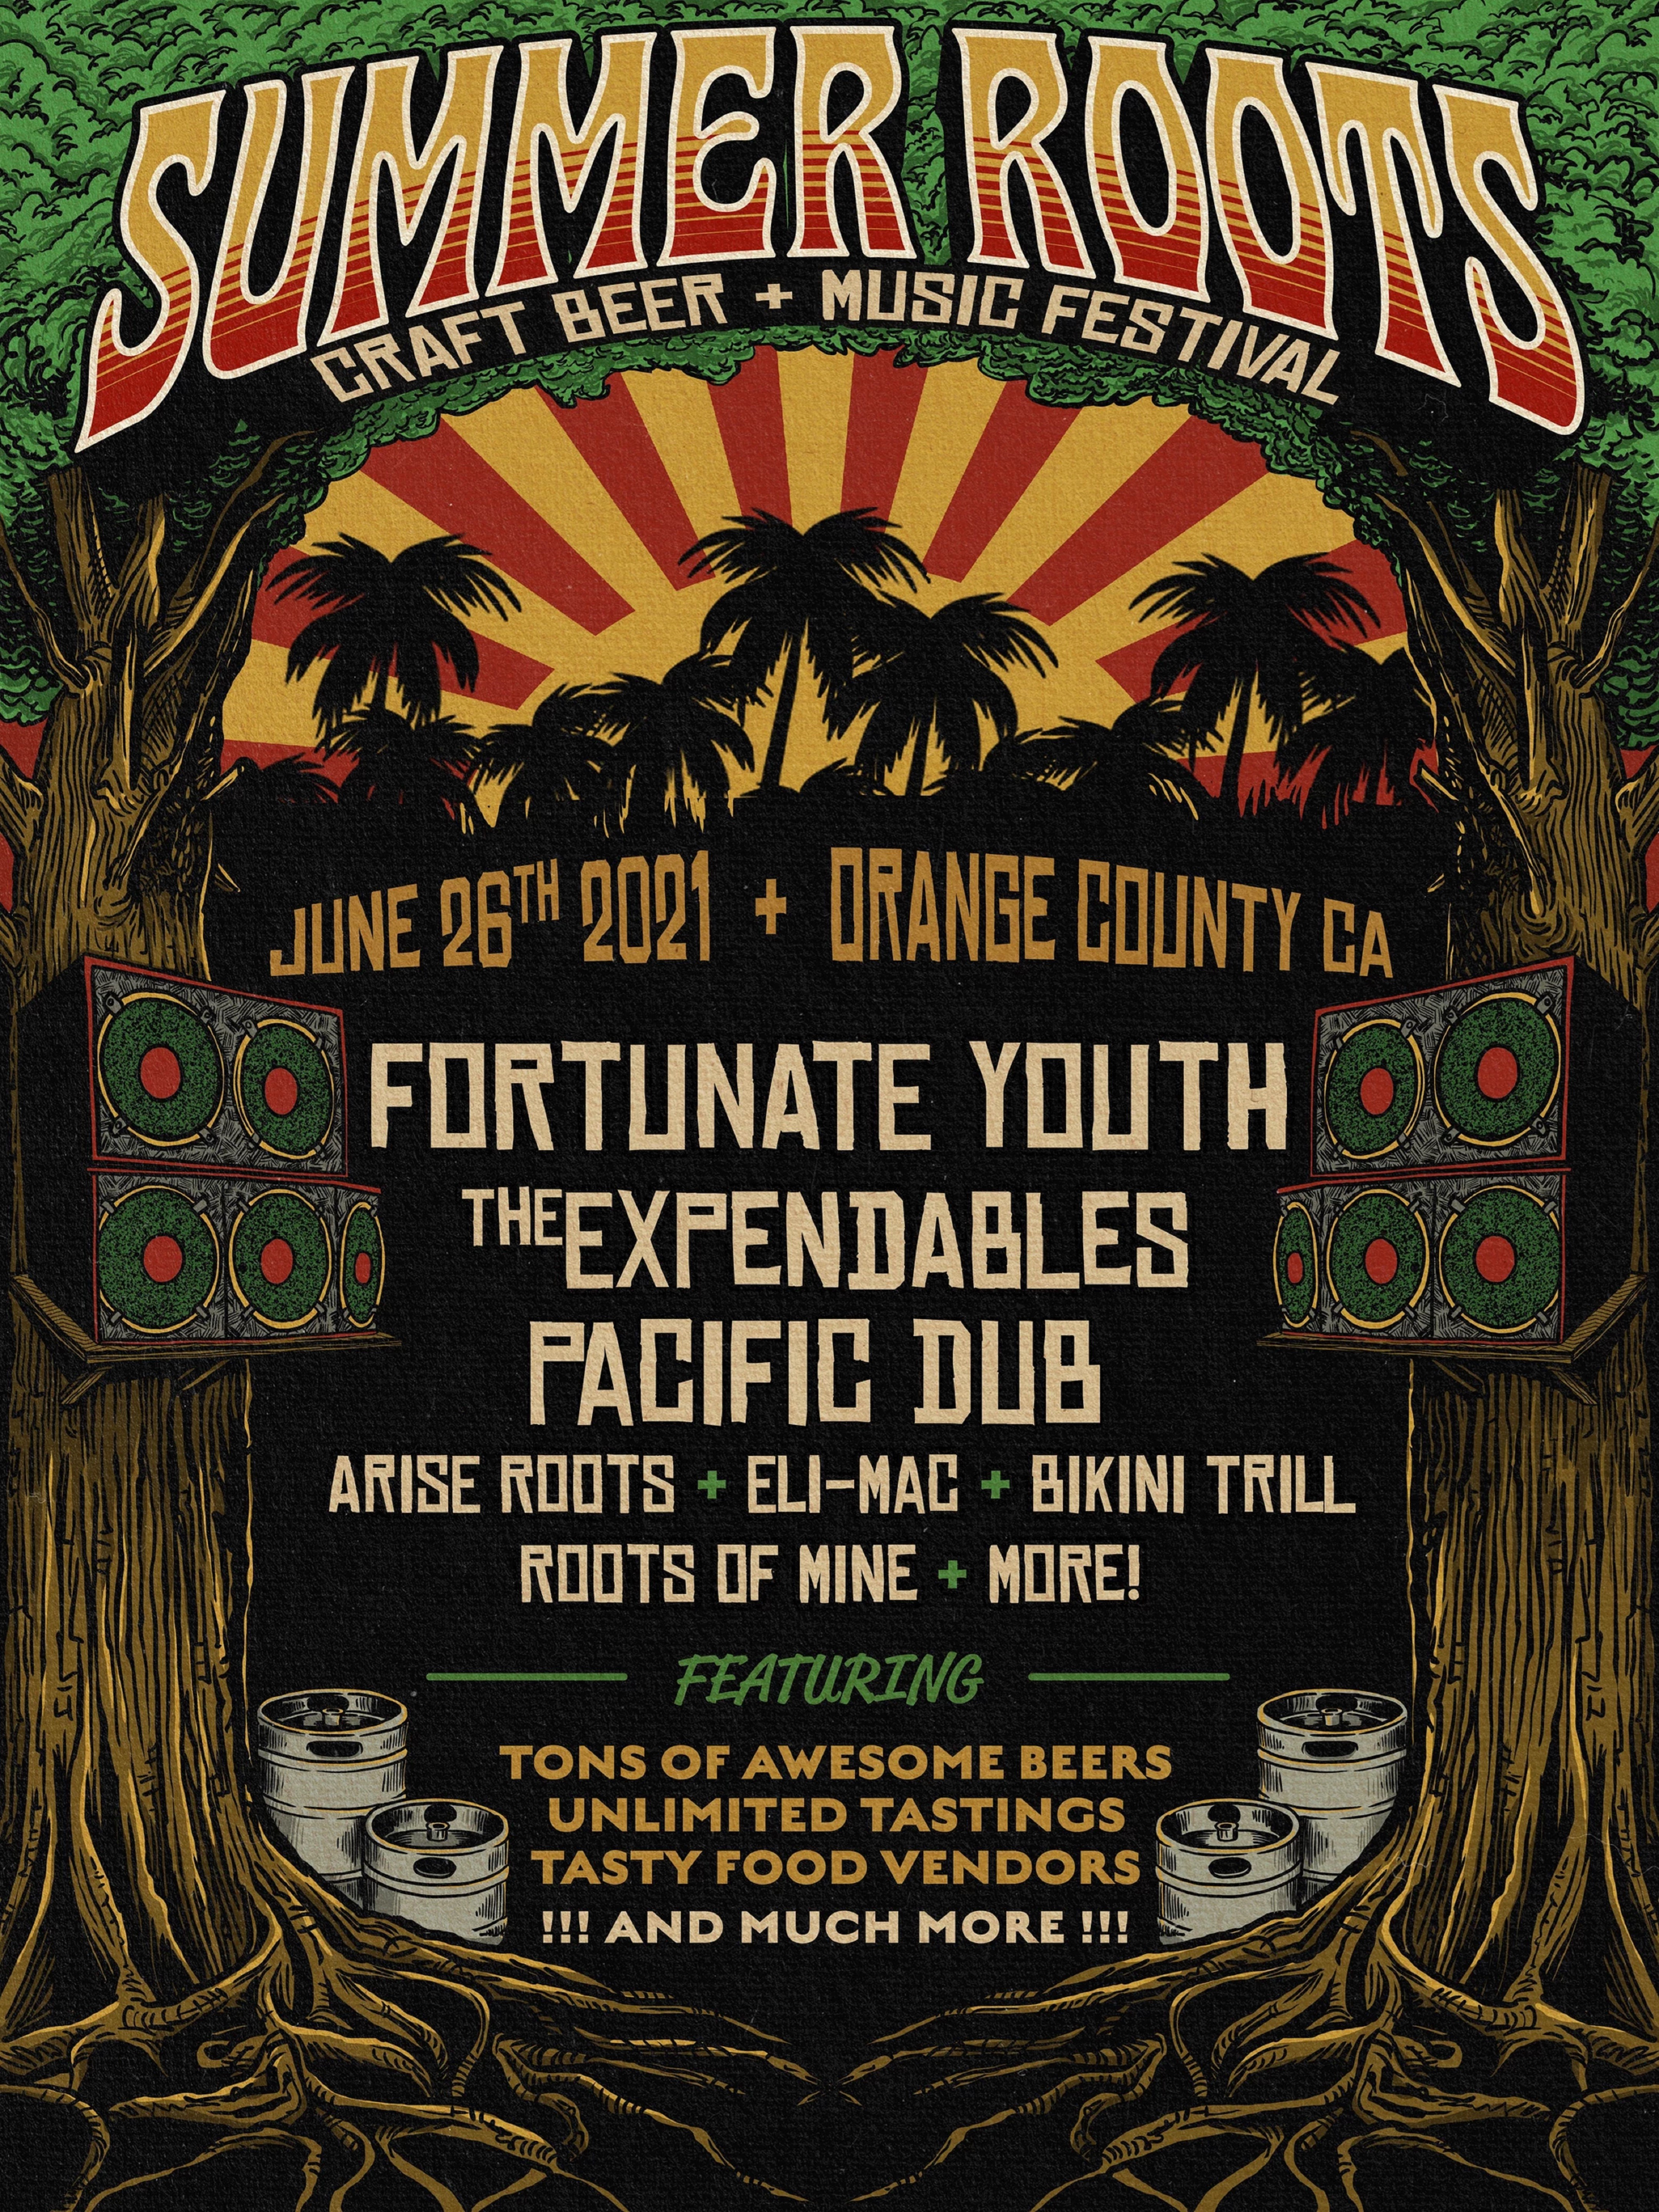 Announcing the Summer Roots Craft Beer & Music Festival